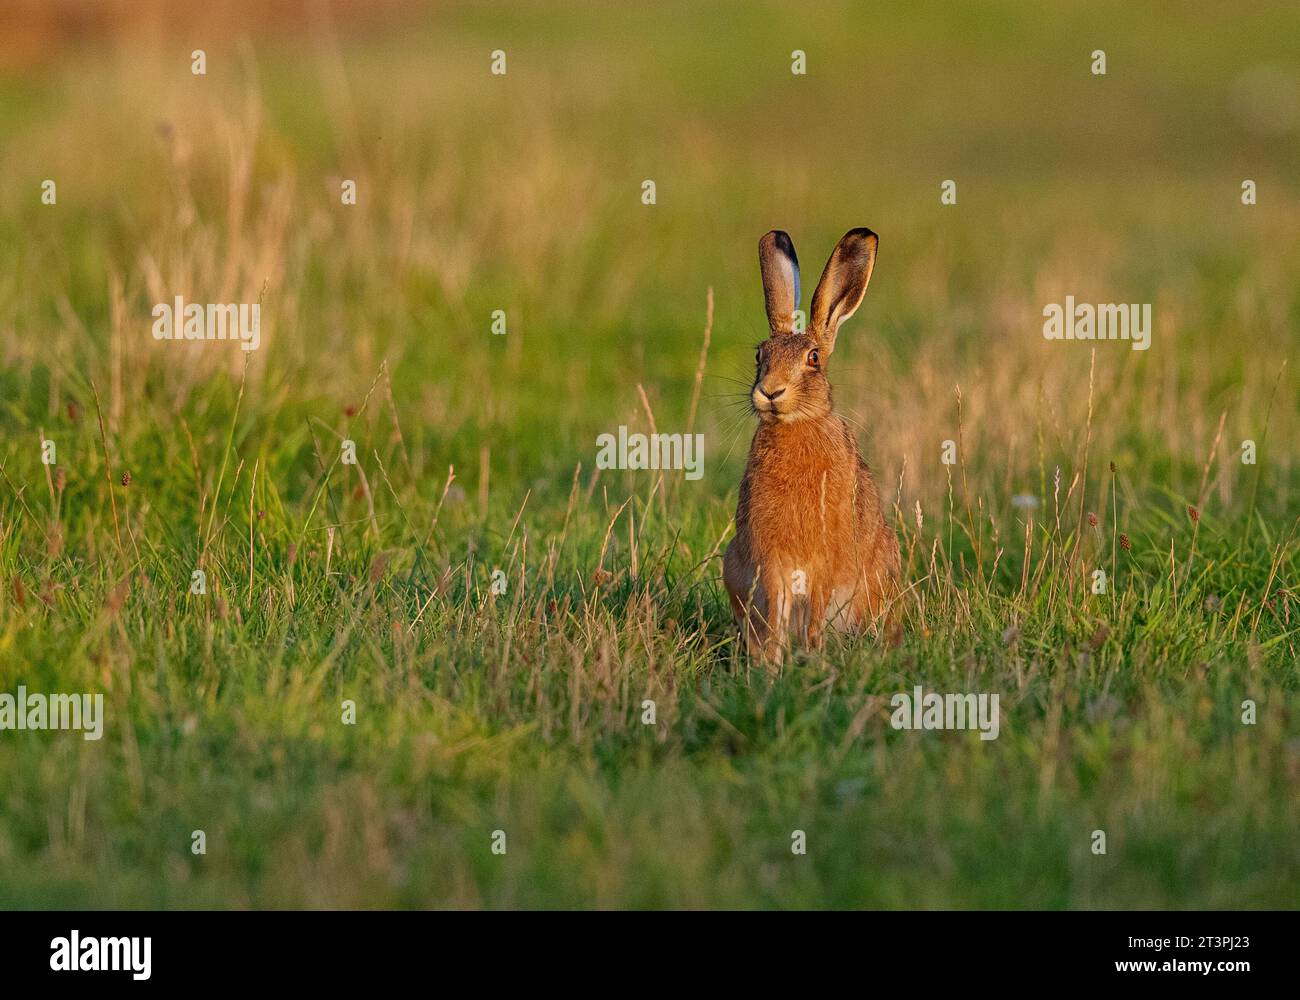 A Wild Brown Hare Sitting Upright And Alert In A Grassy Meadow Bathed